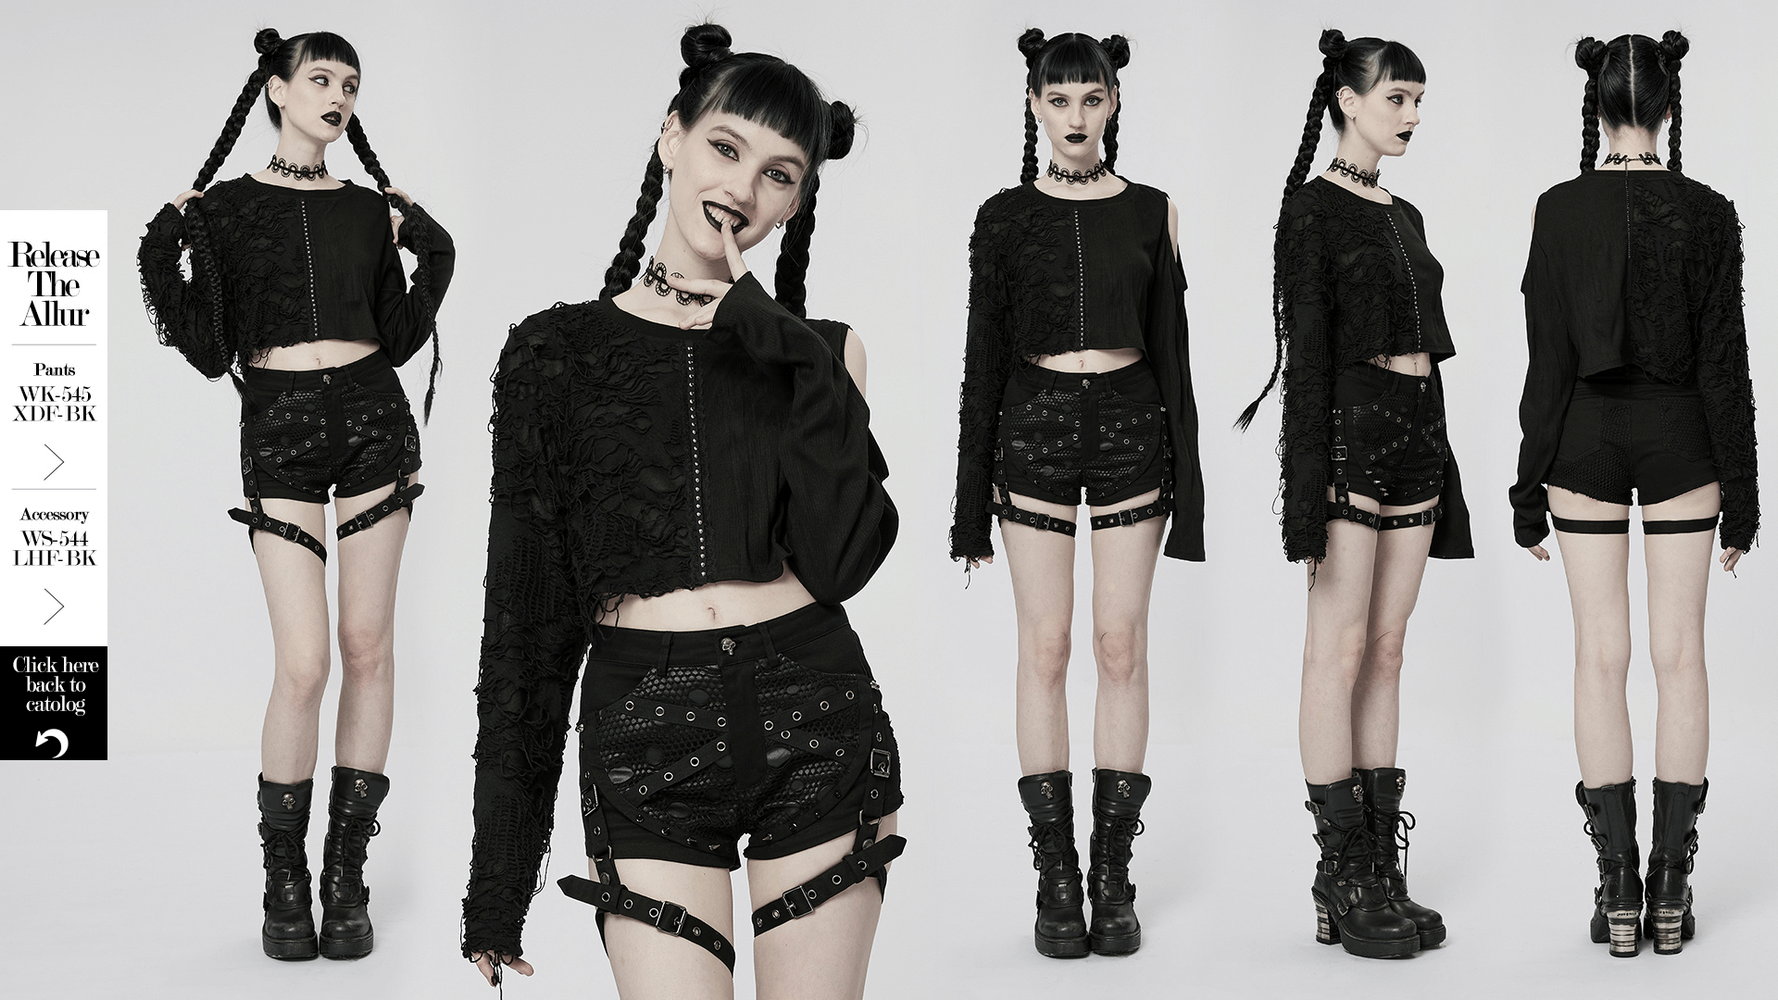 Decayed Mesh Gothic Top with Pleat and Lace Splicing - HARD'N'HEAVY